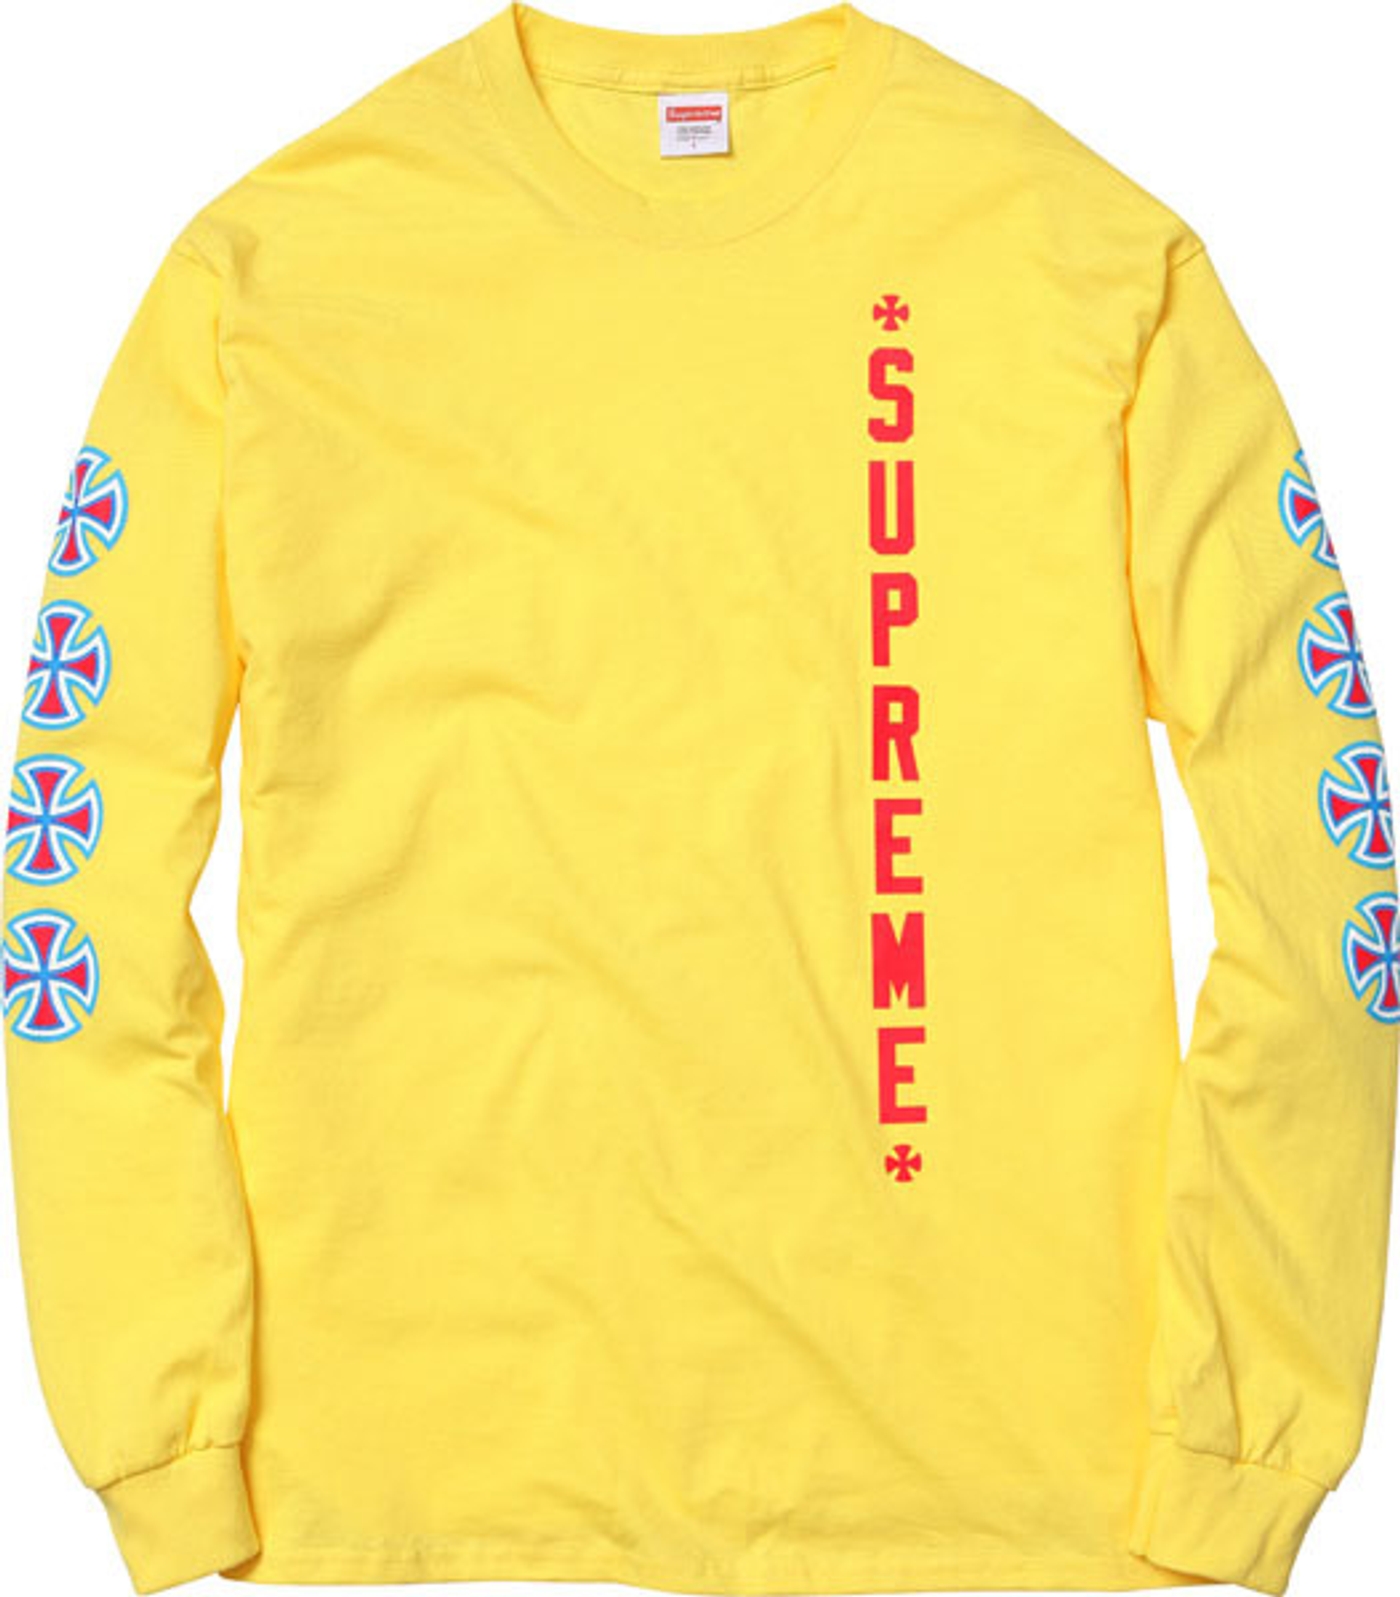 All cotton classic Supreme long sleeve t-shirt (11/13)